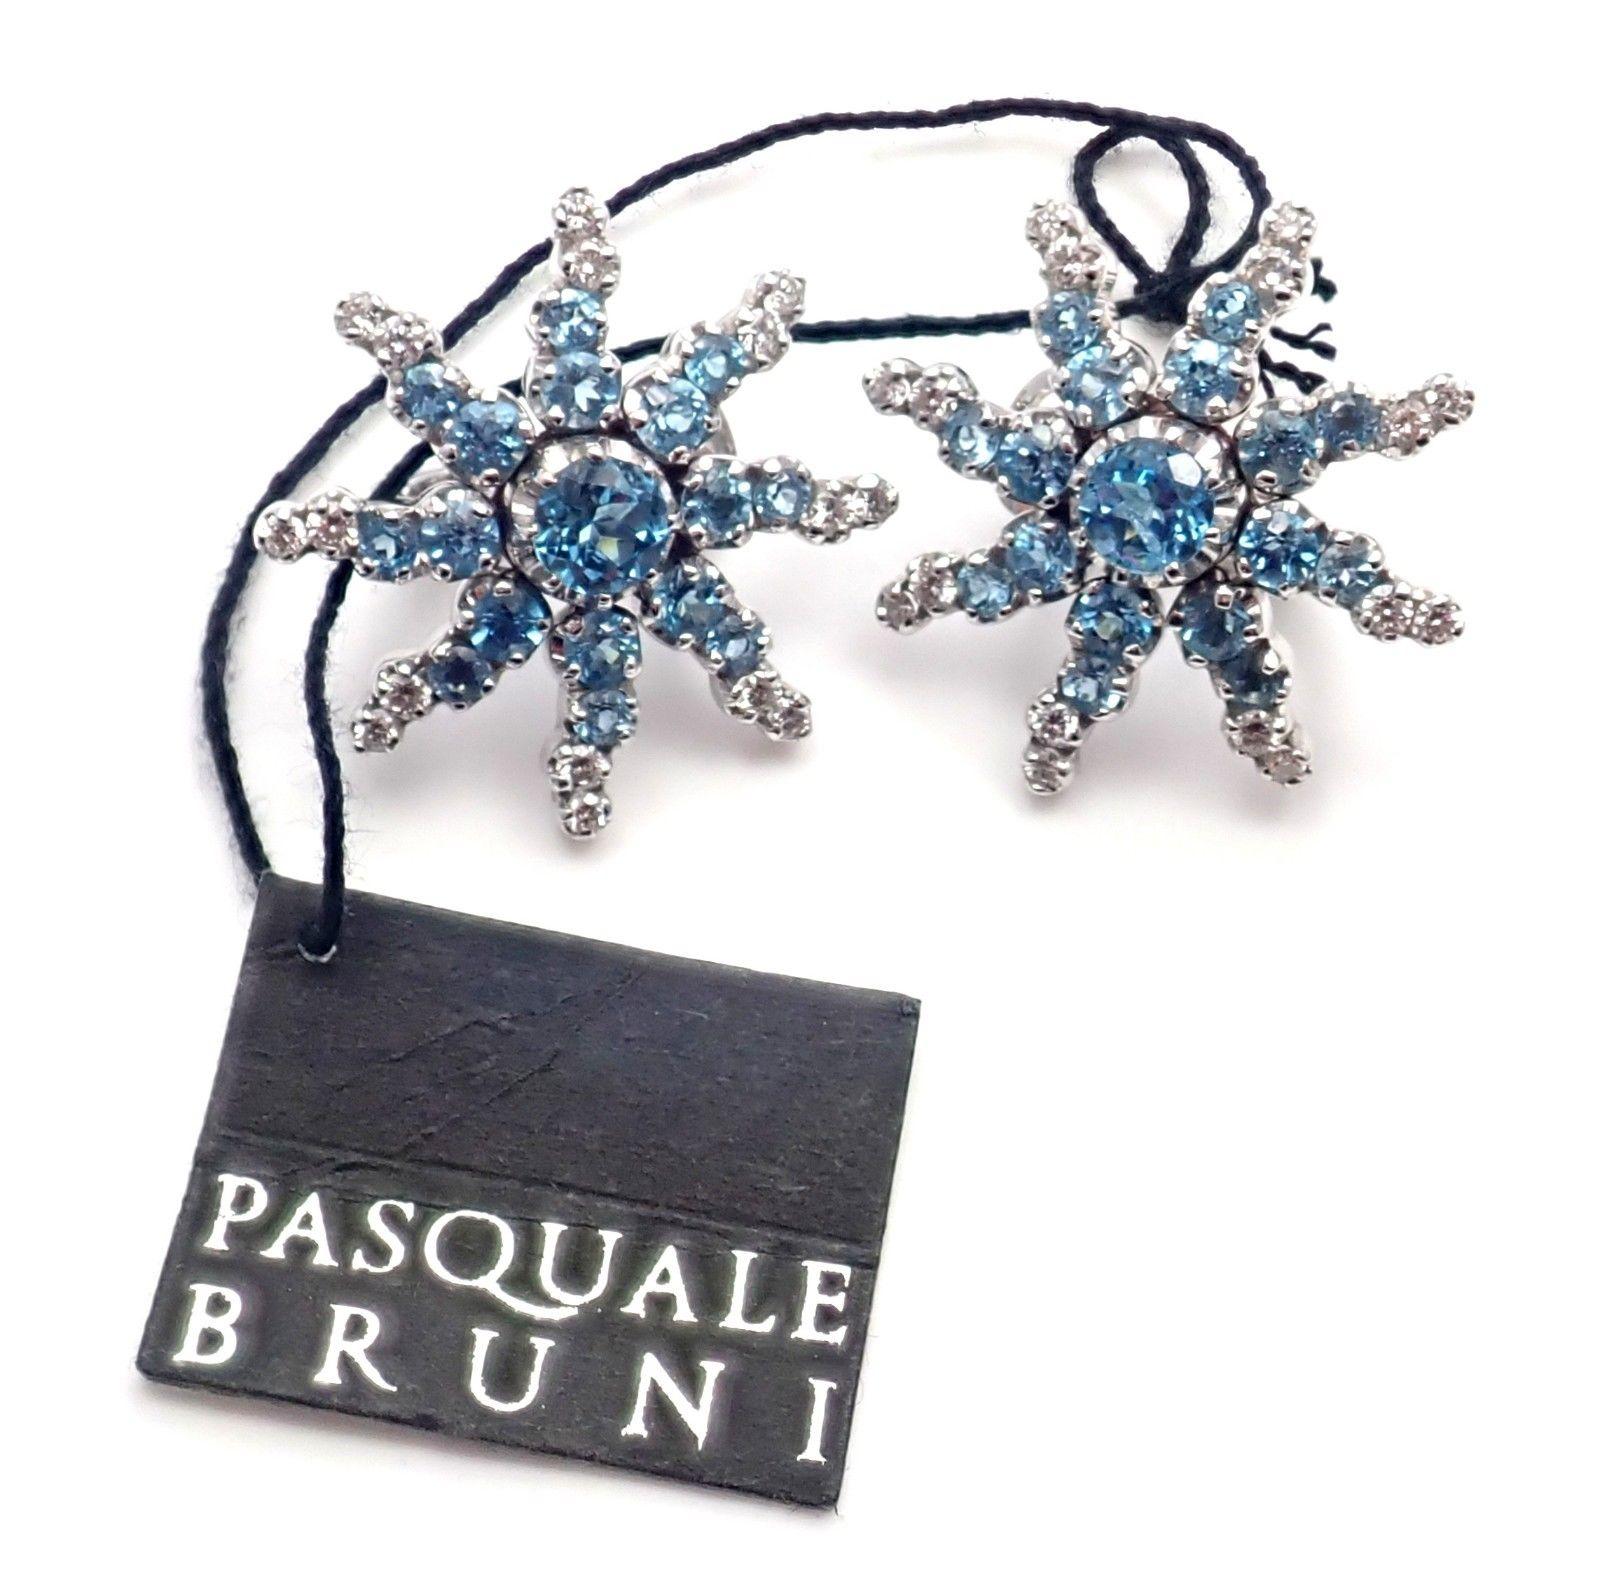 18k White Gold Diamond Aquamarine Sun Earrings by Pasquale Bruni. 
With 32 round brilliant cut diamonds VS1 Clarity G Color total weight approx. .87ct
34 Aquamarine stones total weight approx. 5.03ct
 These earrings come with Box, Certificate and